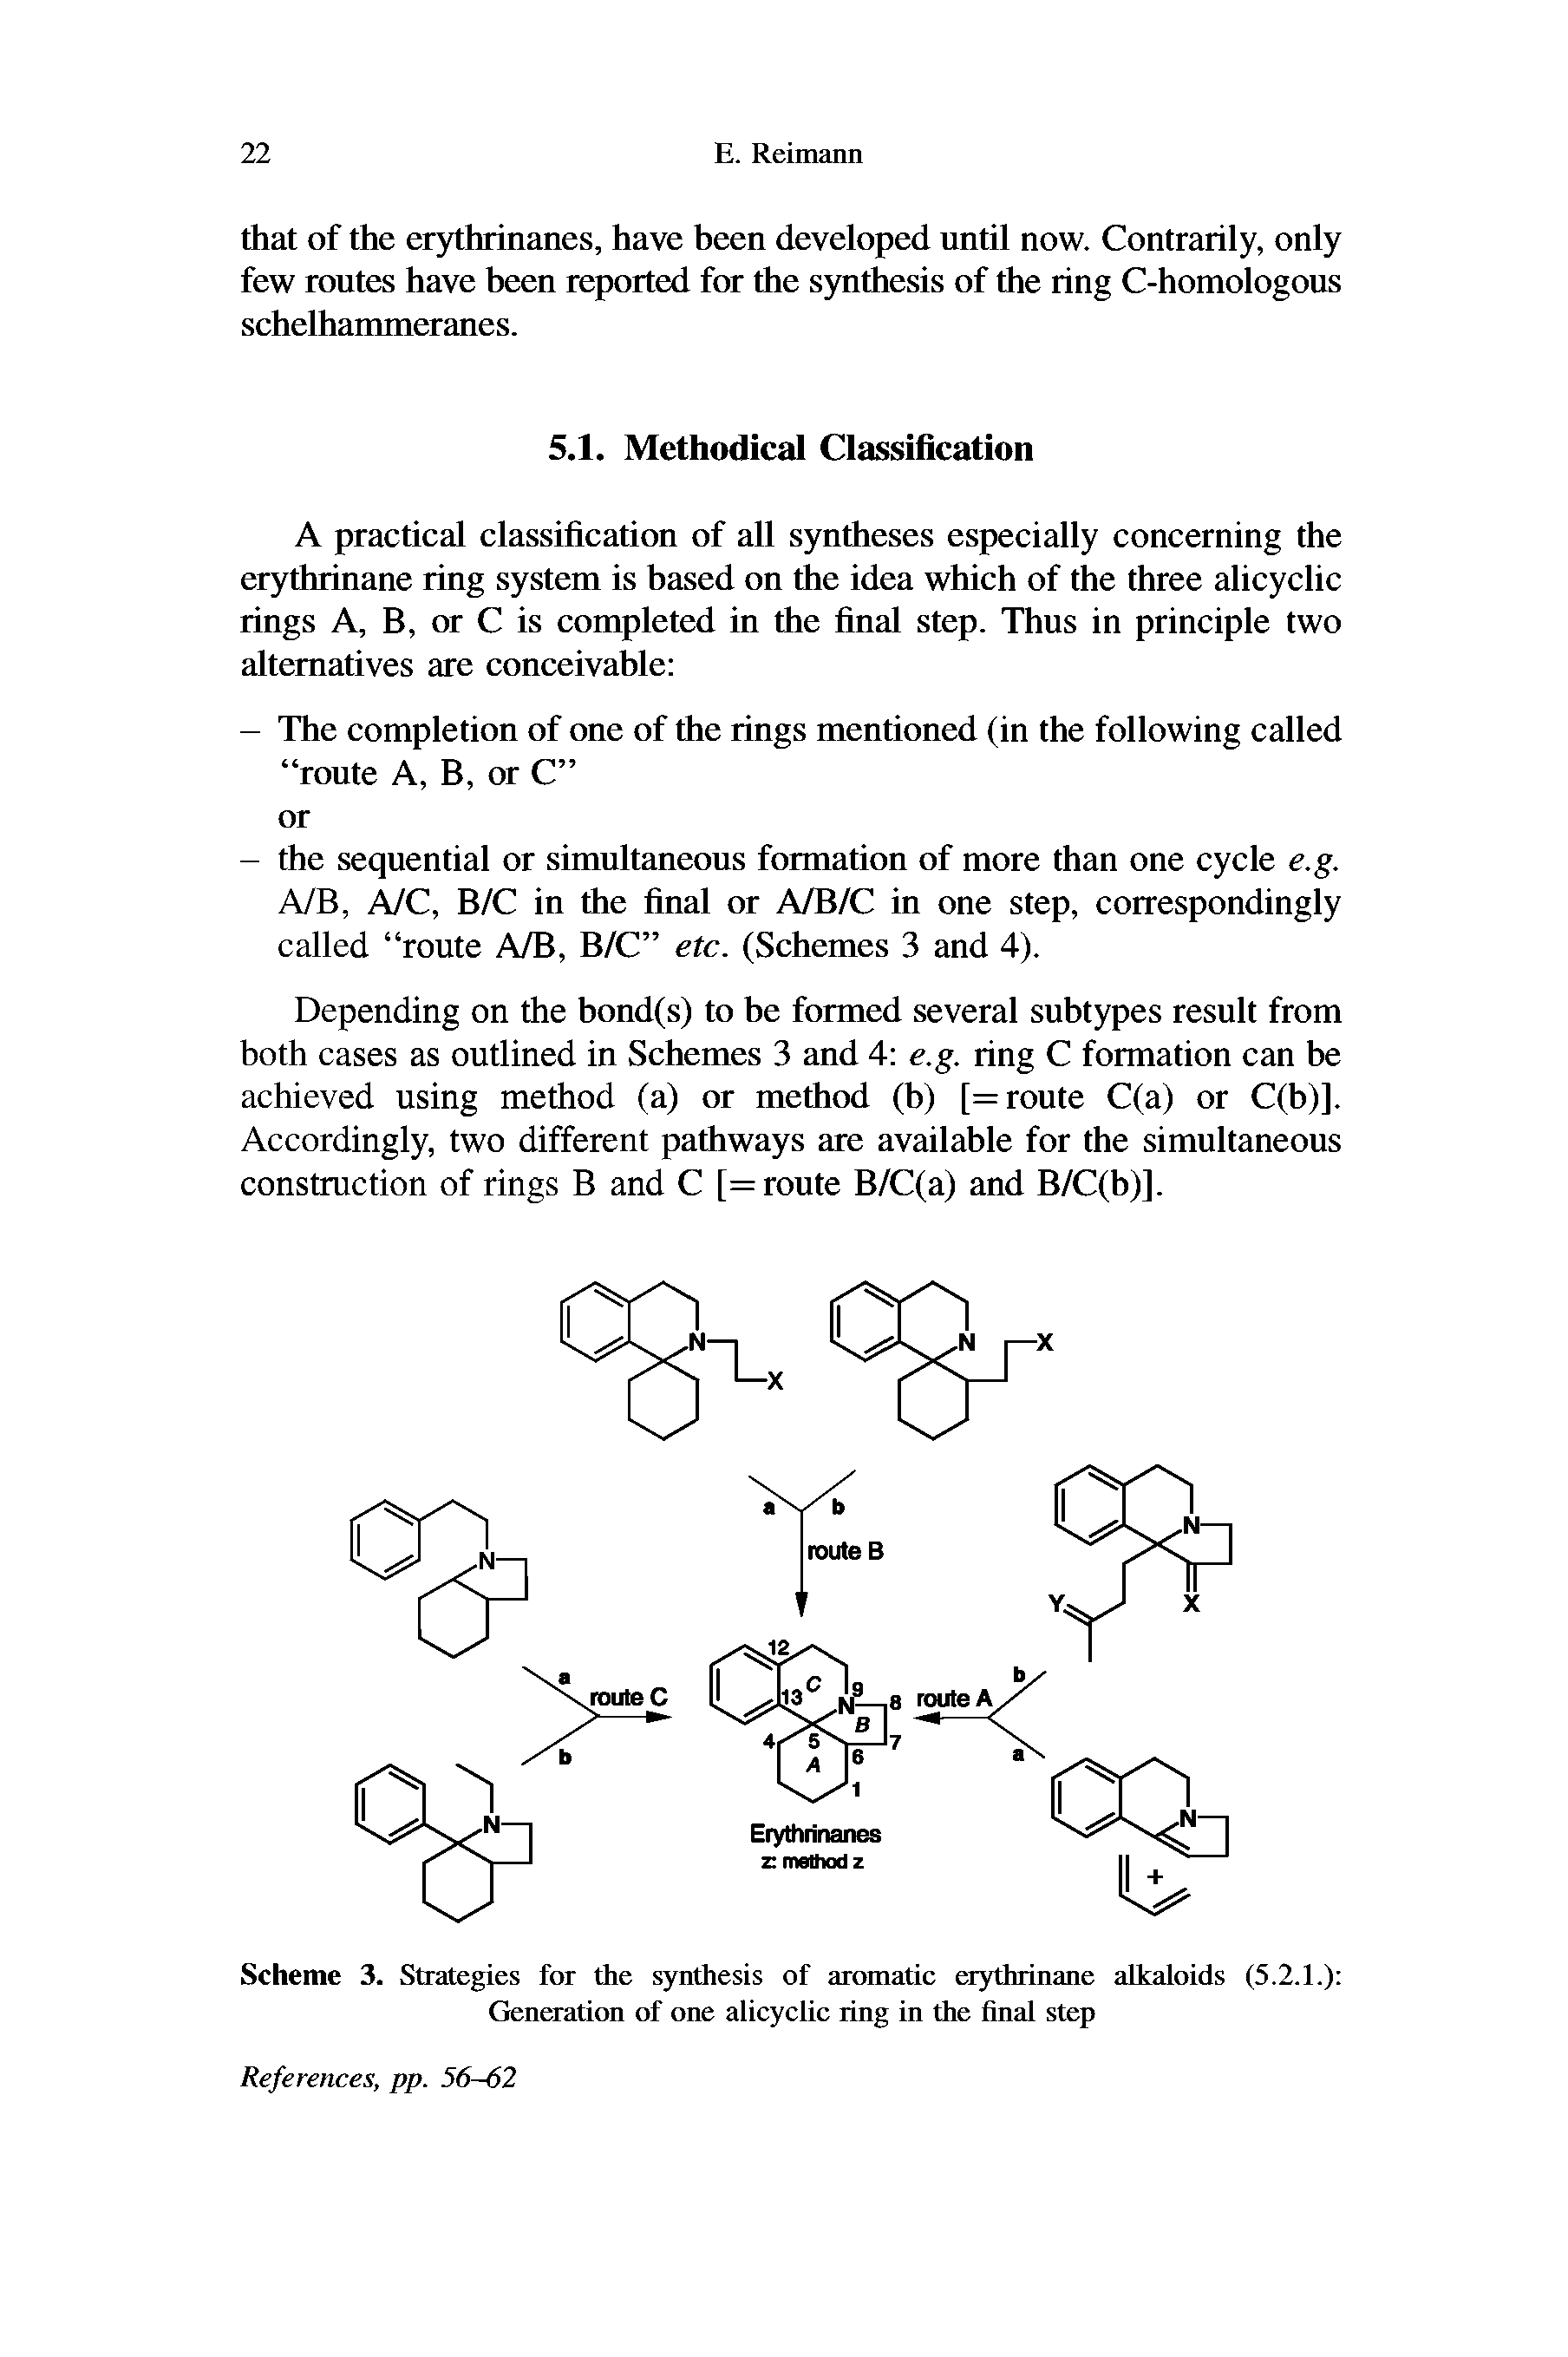 Scheme 3. Strategies for the synthesis of aromatic erythrinane alkaloids (5.2.1.) Generation of one alicyclic ring in the final step...